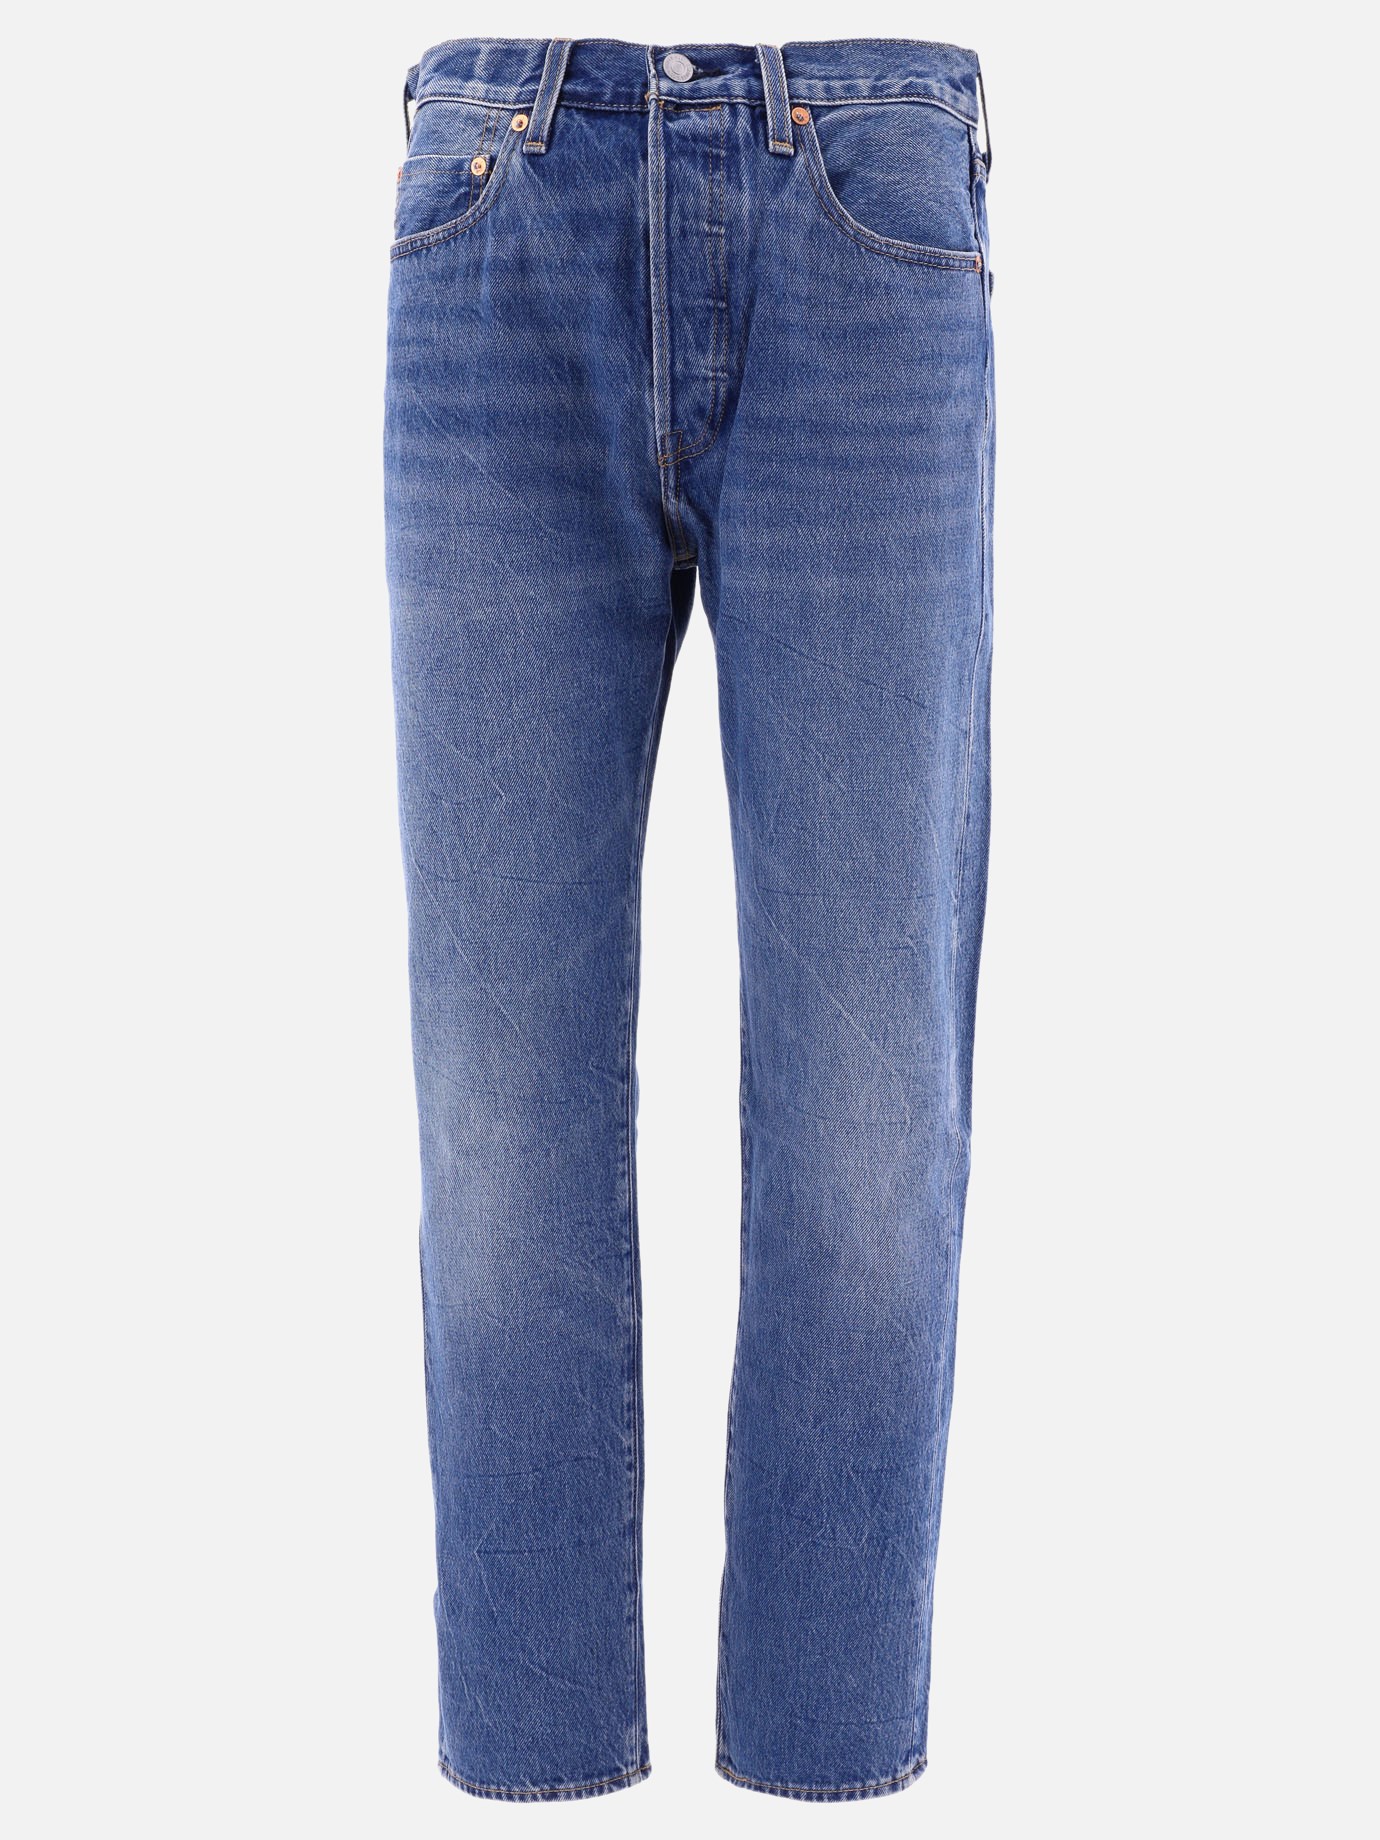 Jeans  501 1980s by Levi's Made & Crafted - 5